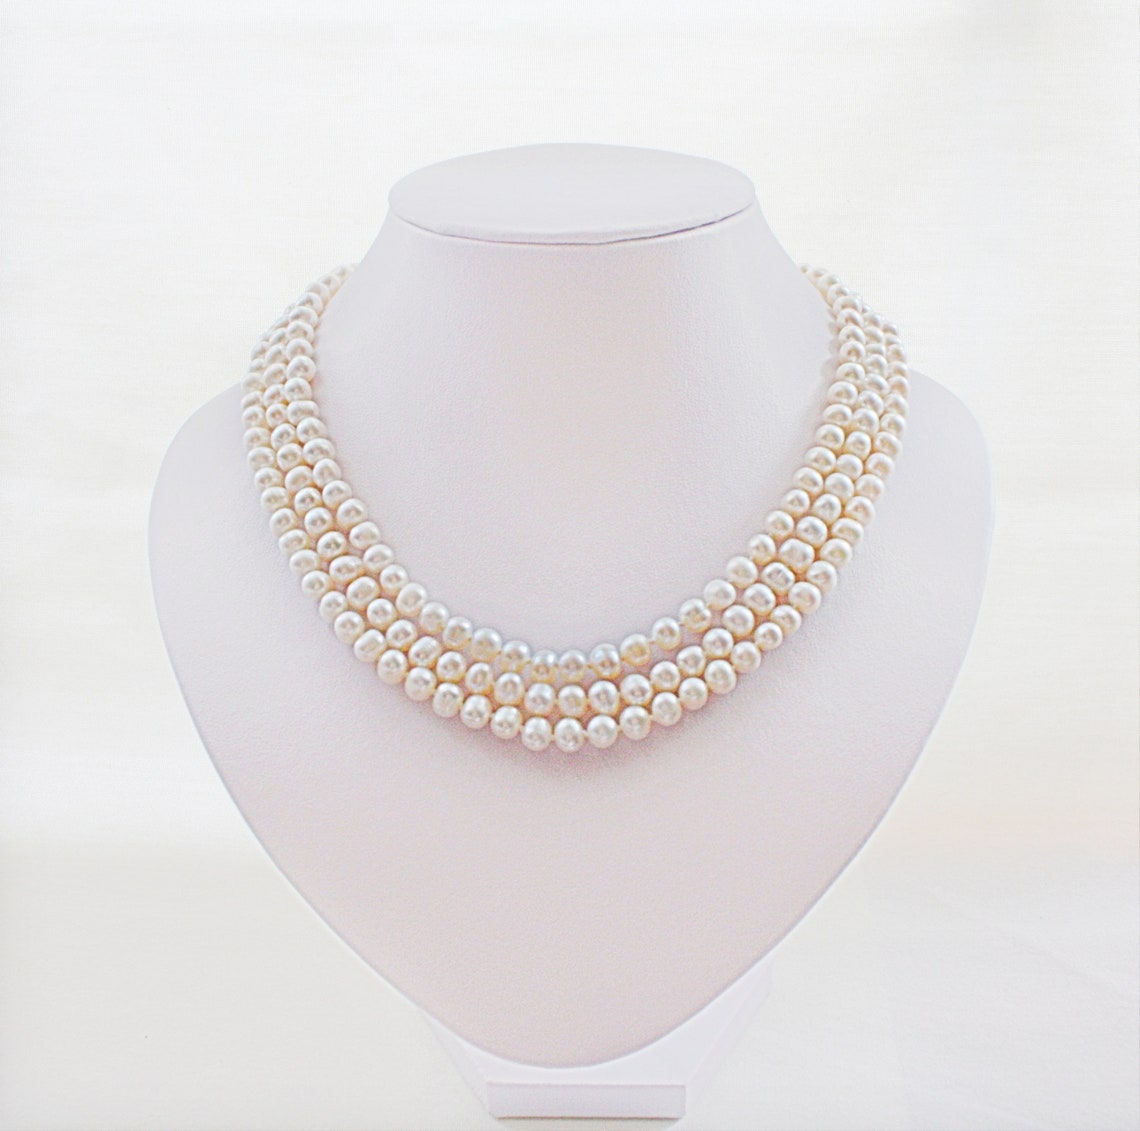 3 Strand Pearl Necklace Multistrand Pearl Necklace 3 Strand - Etsy